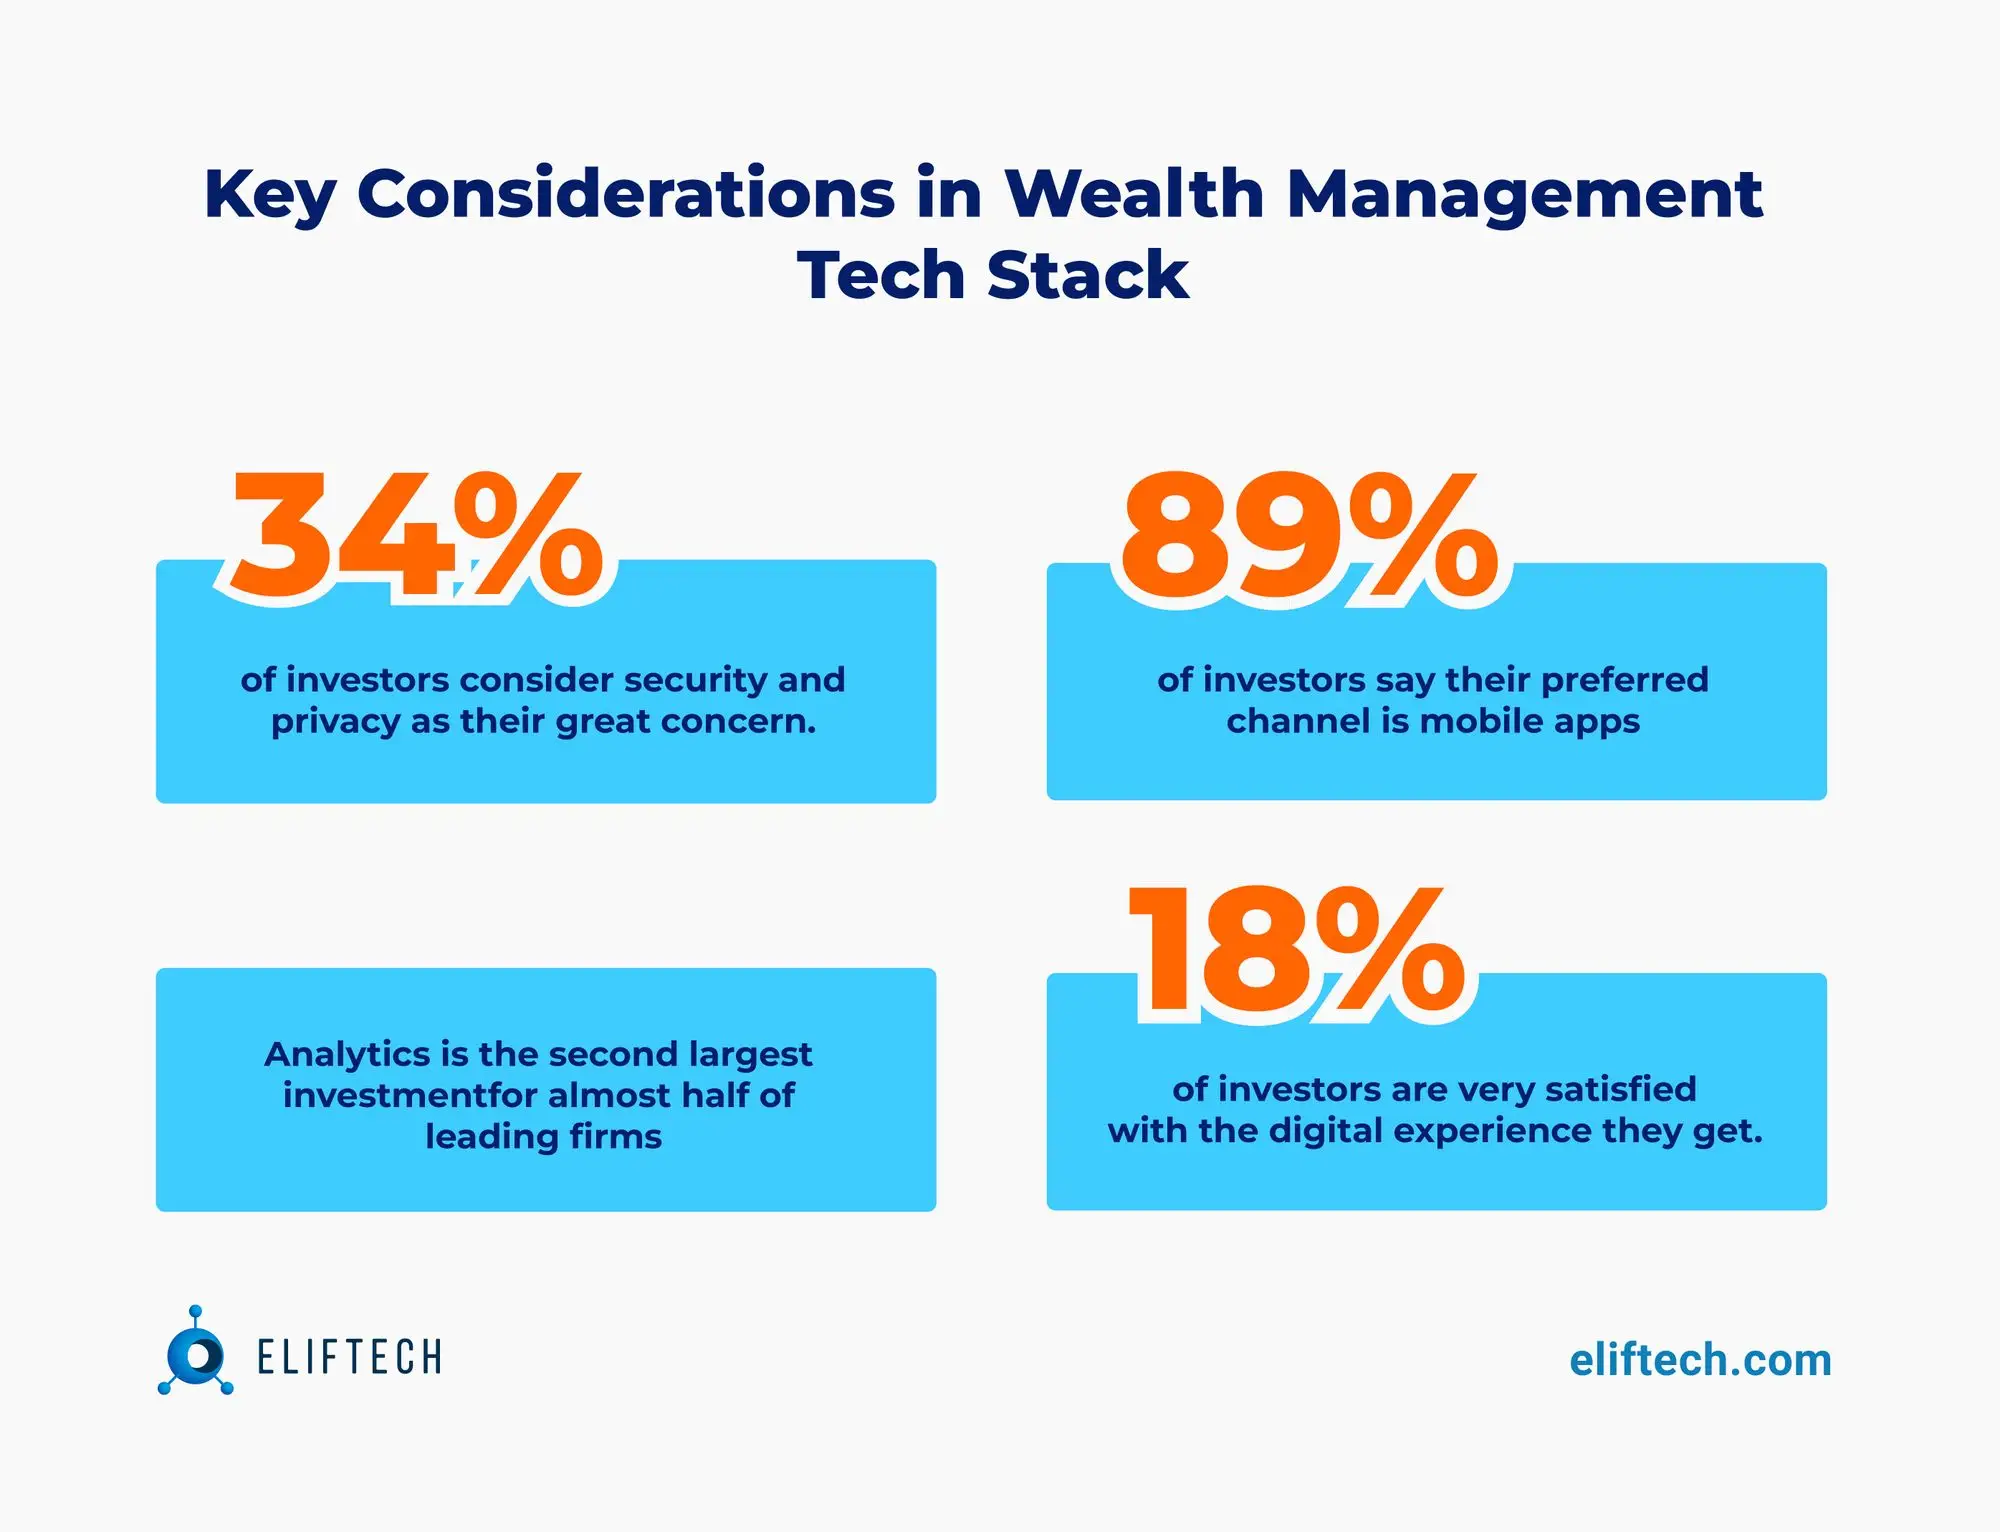 Key Considerations in Wealth Management Tech Stack